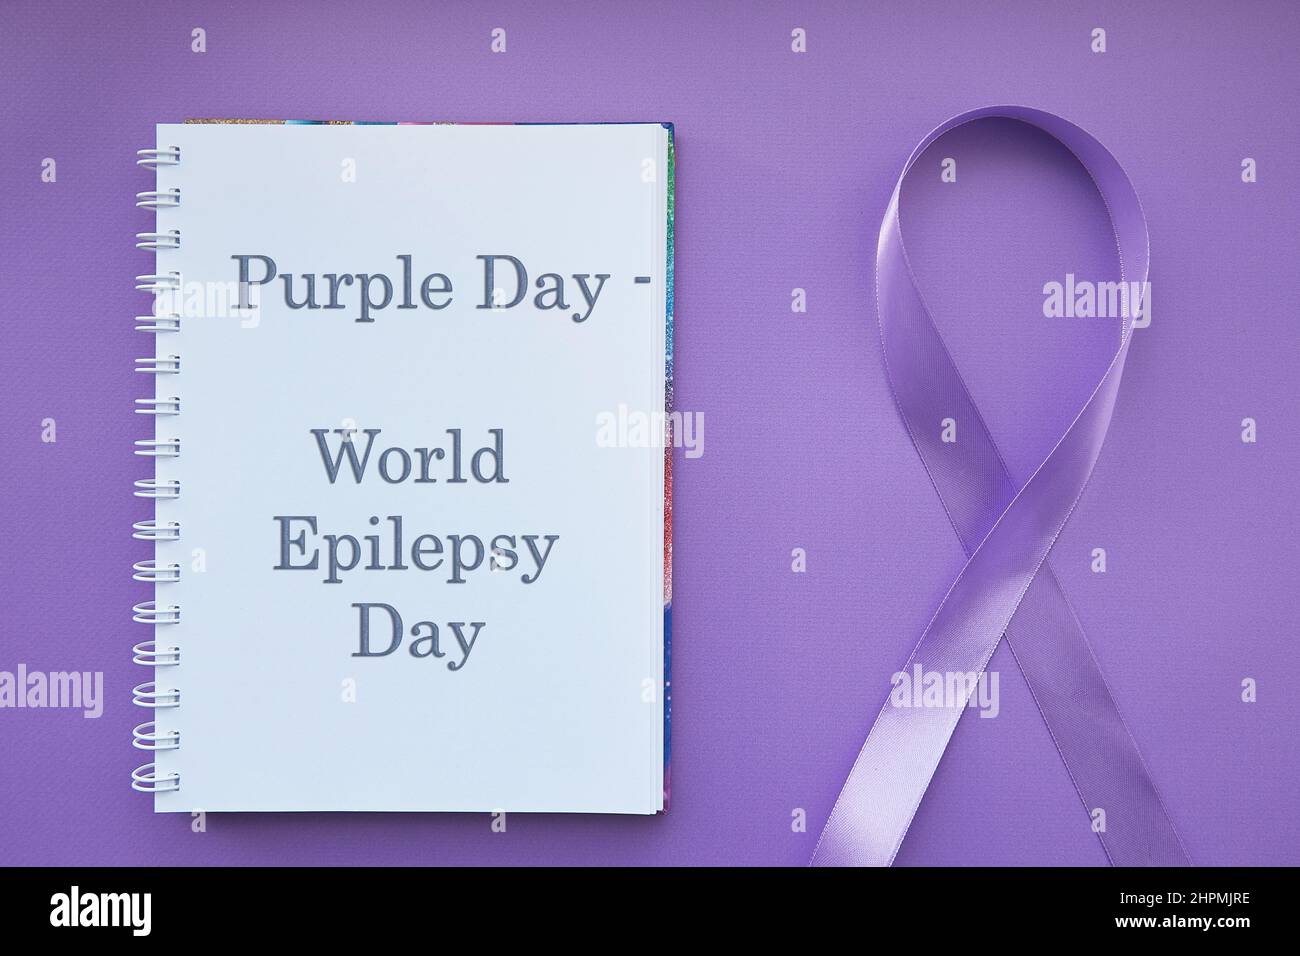 Purple Day - World Epilepsy Day, March of 26. Symbol of Epilepsy Day. Ribbon and text. Stock Photo